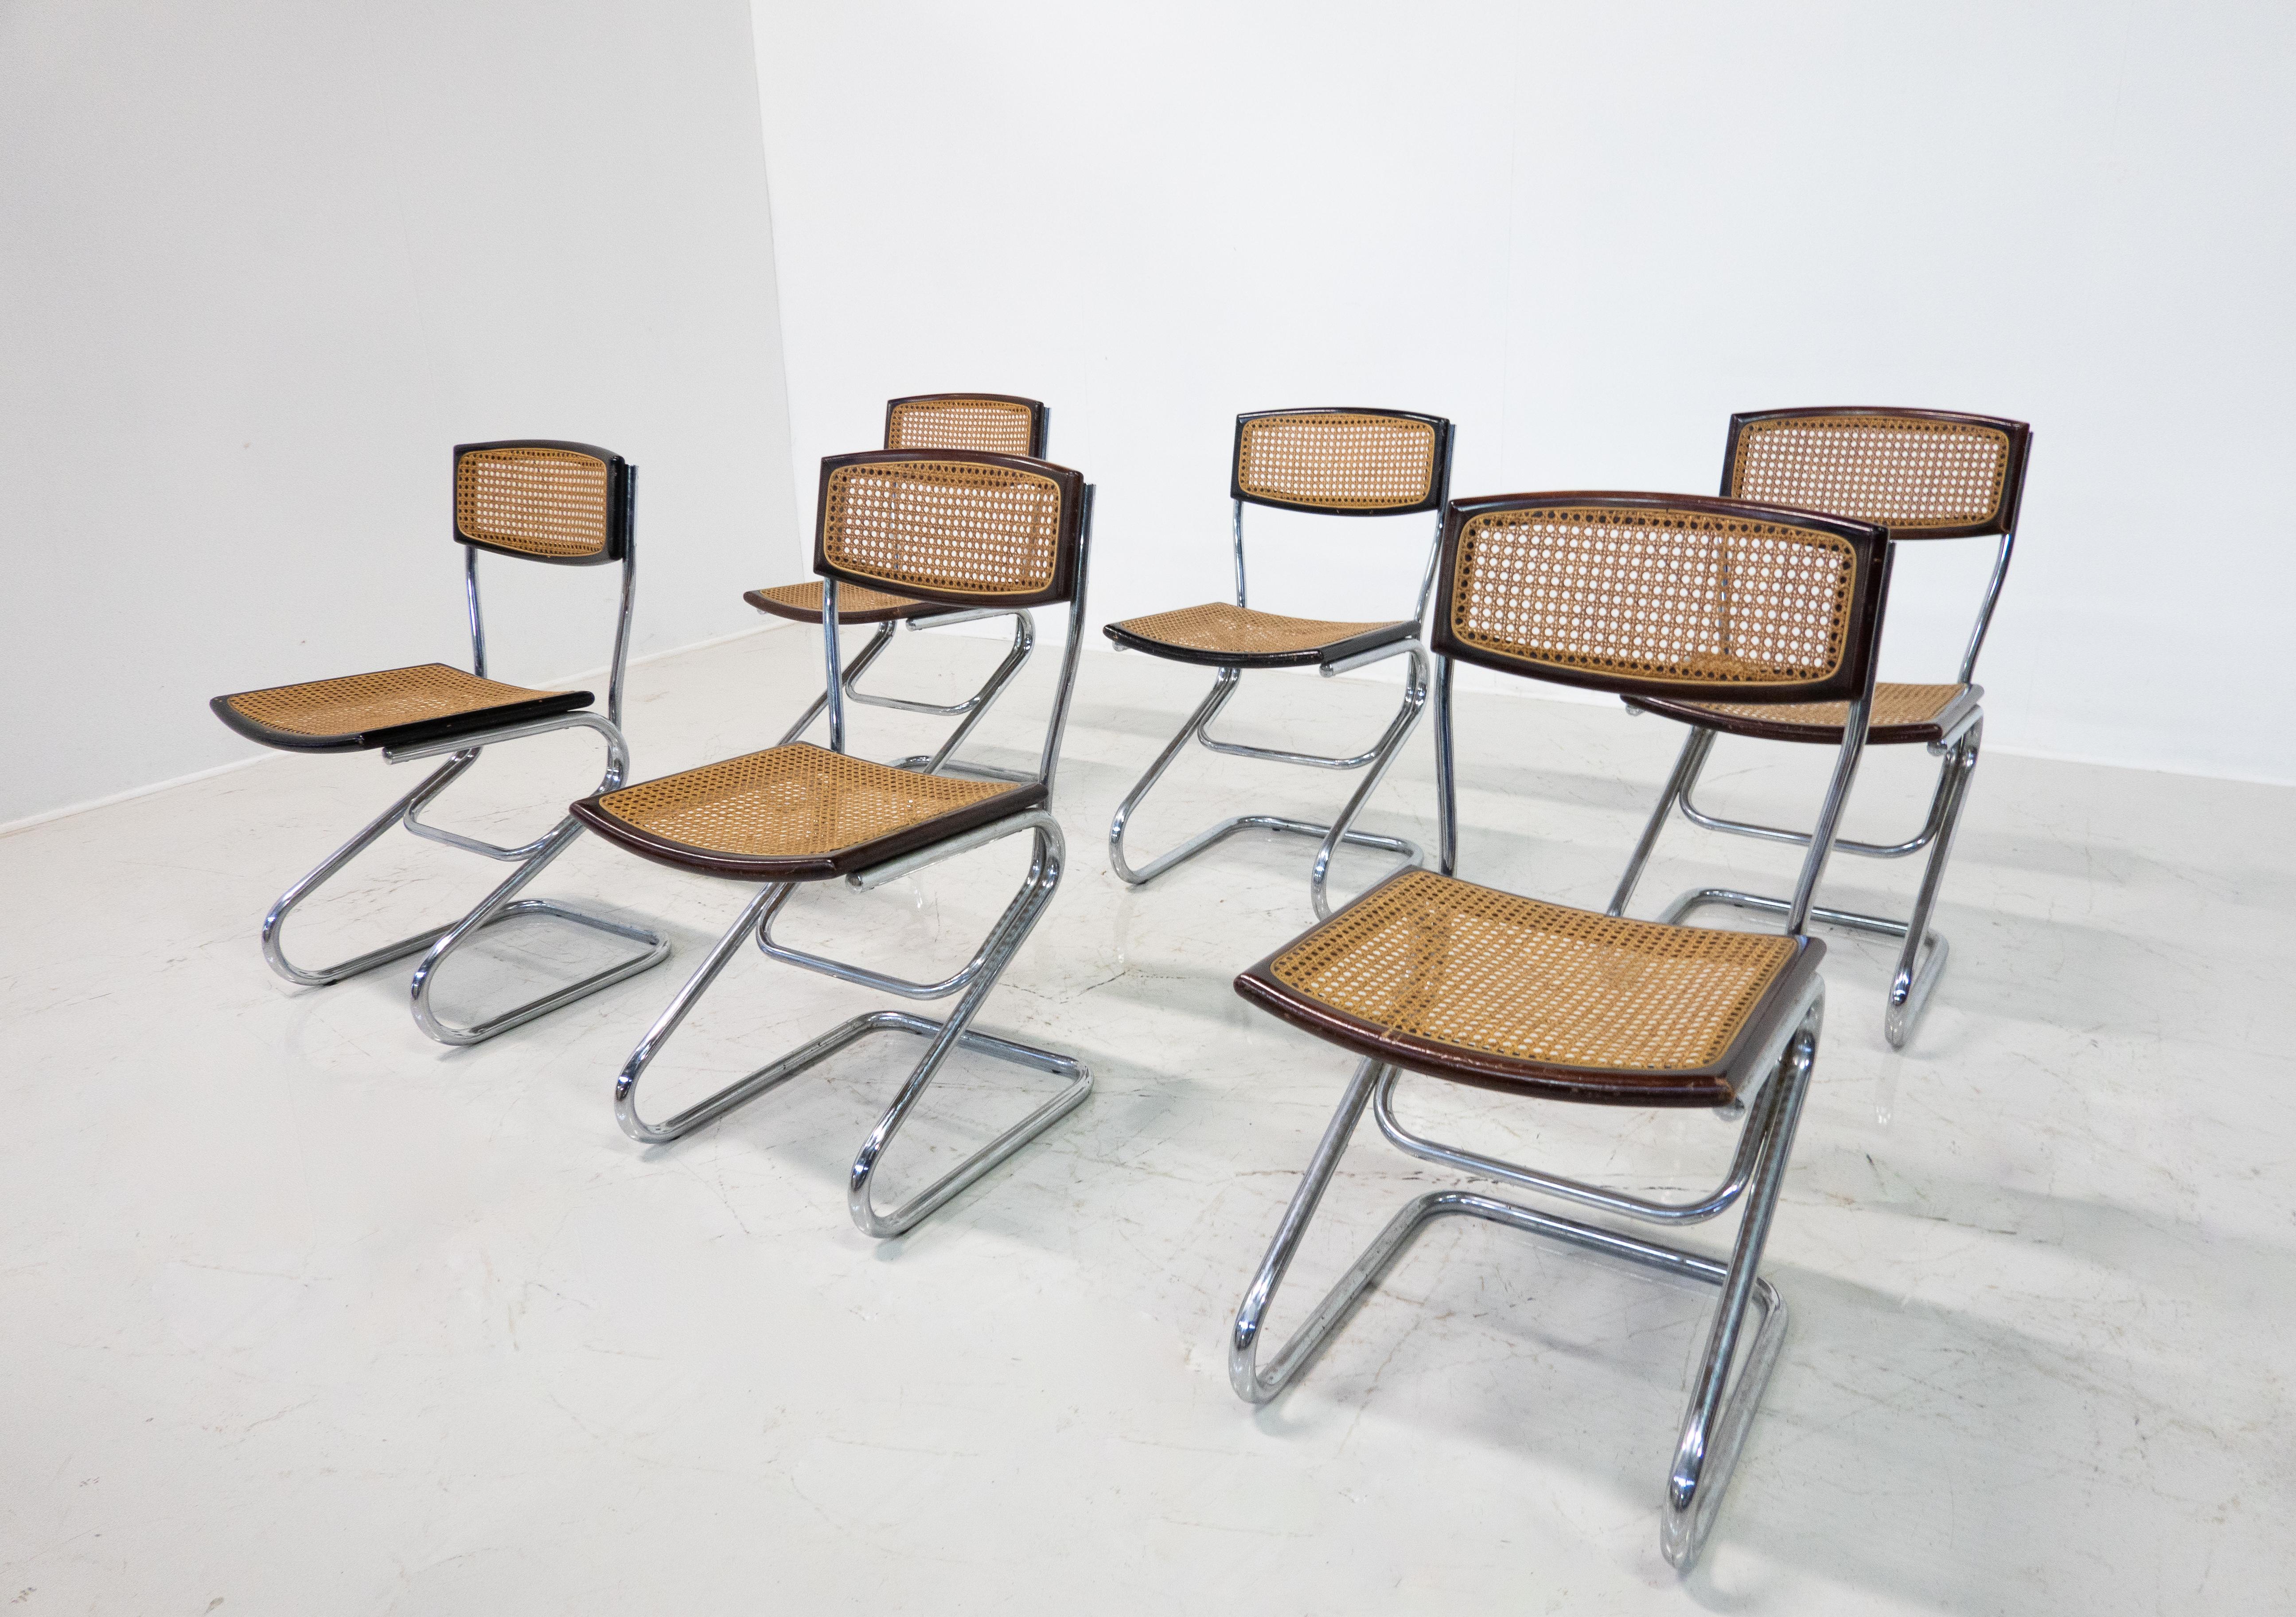 Mid-20th Century Mid-Century Modern Set of 6 Italian Cane Chairs, 1960s For Sale